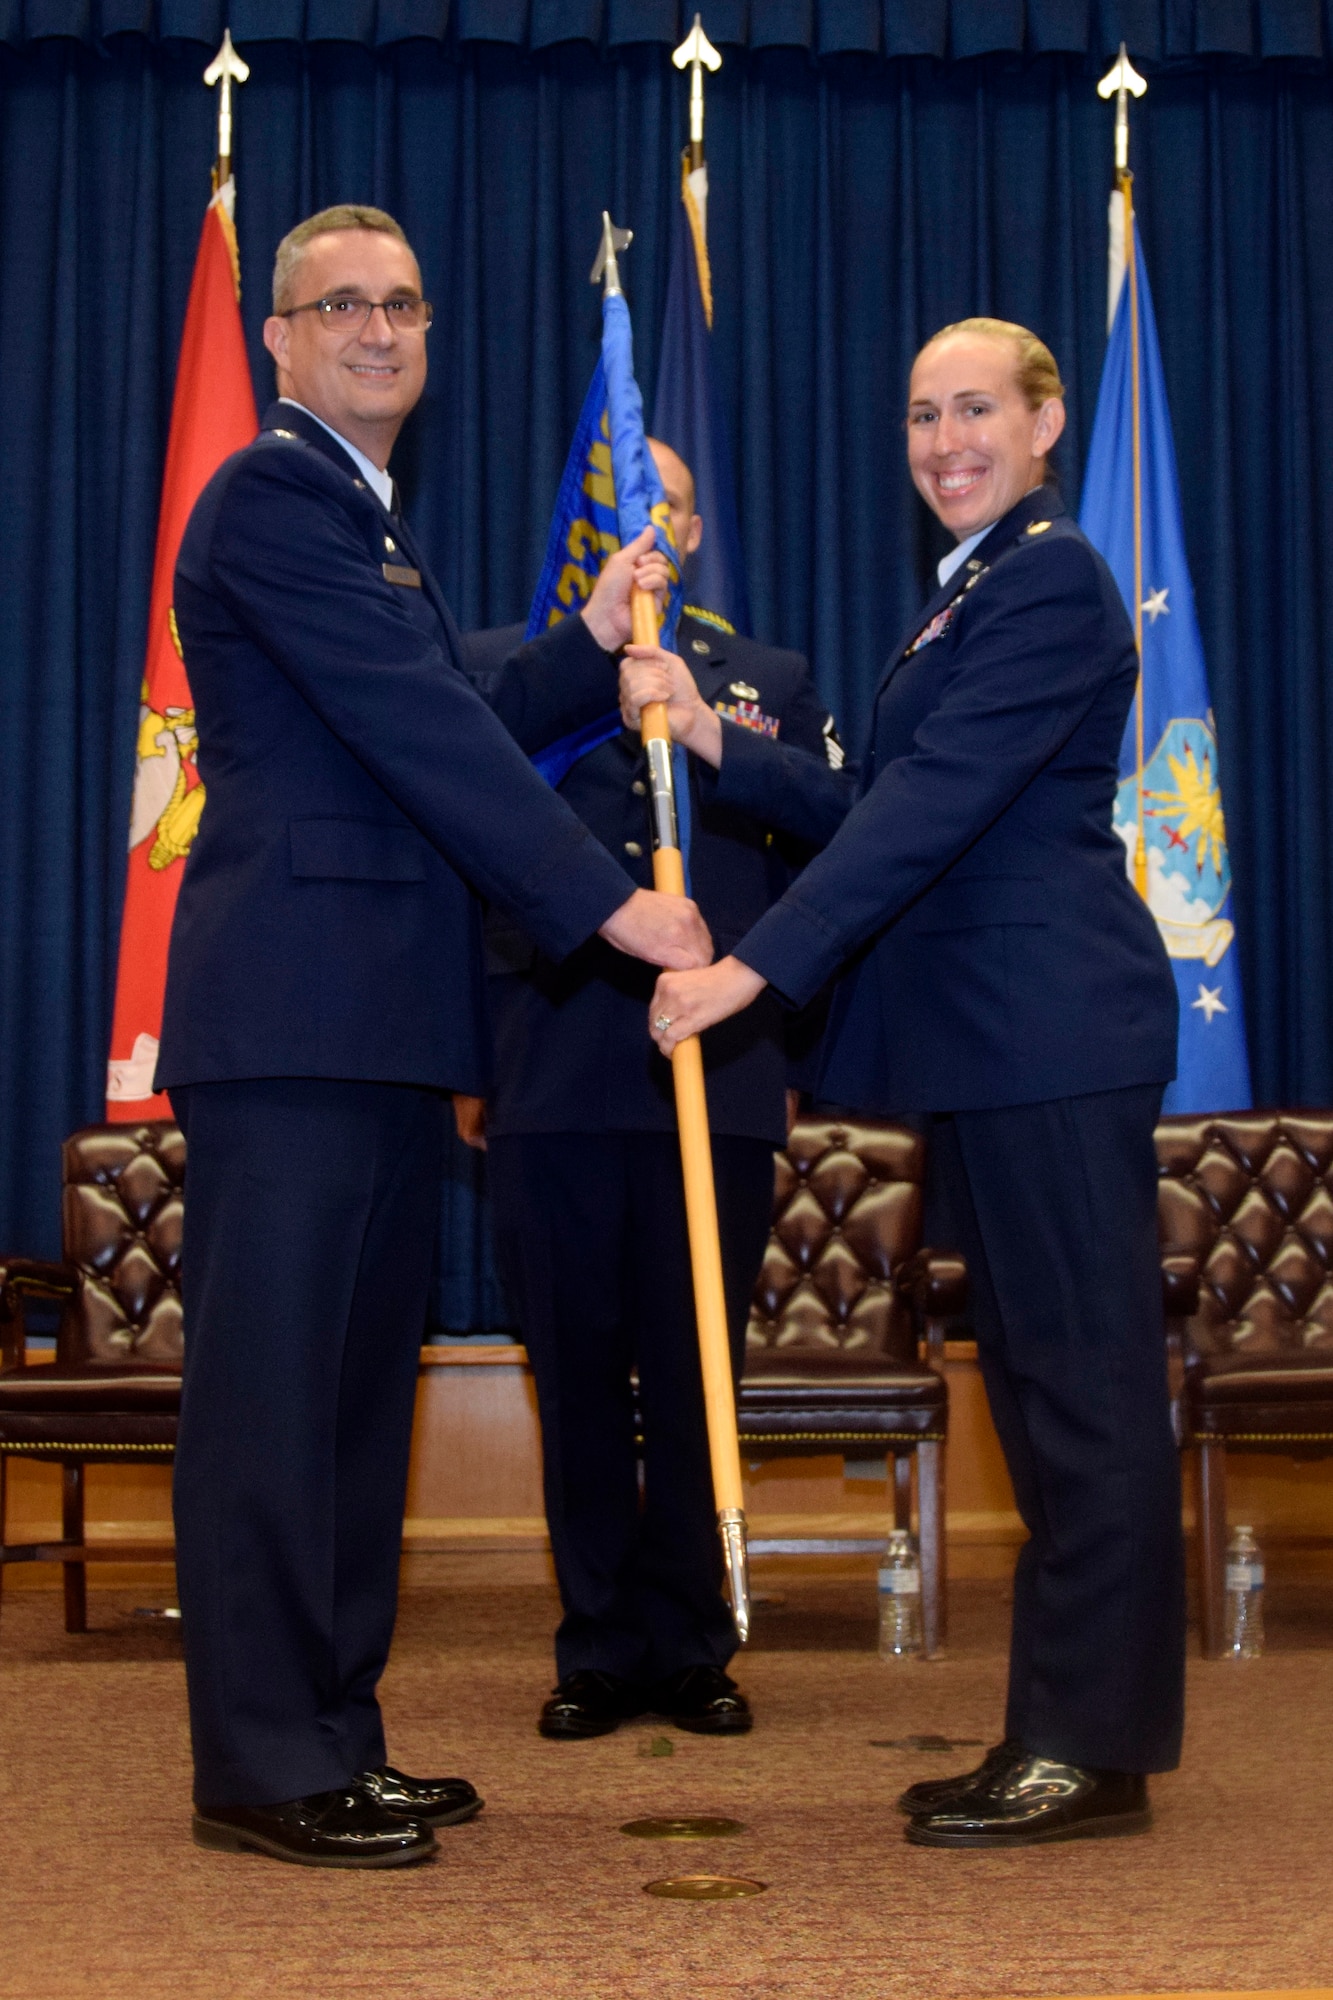 U.S. Air Force Reserves Command 433 LRS welcomes Maj. Sarah N. Scaglione in a change of command ceremony July 14, 2018 at JBSA-Lackland.